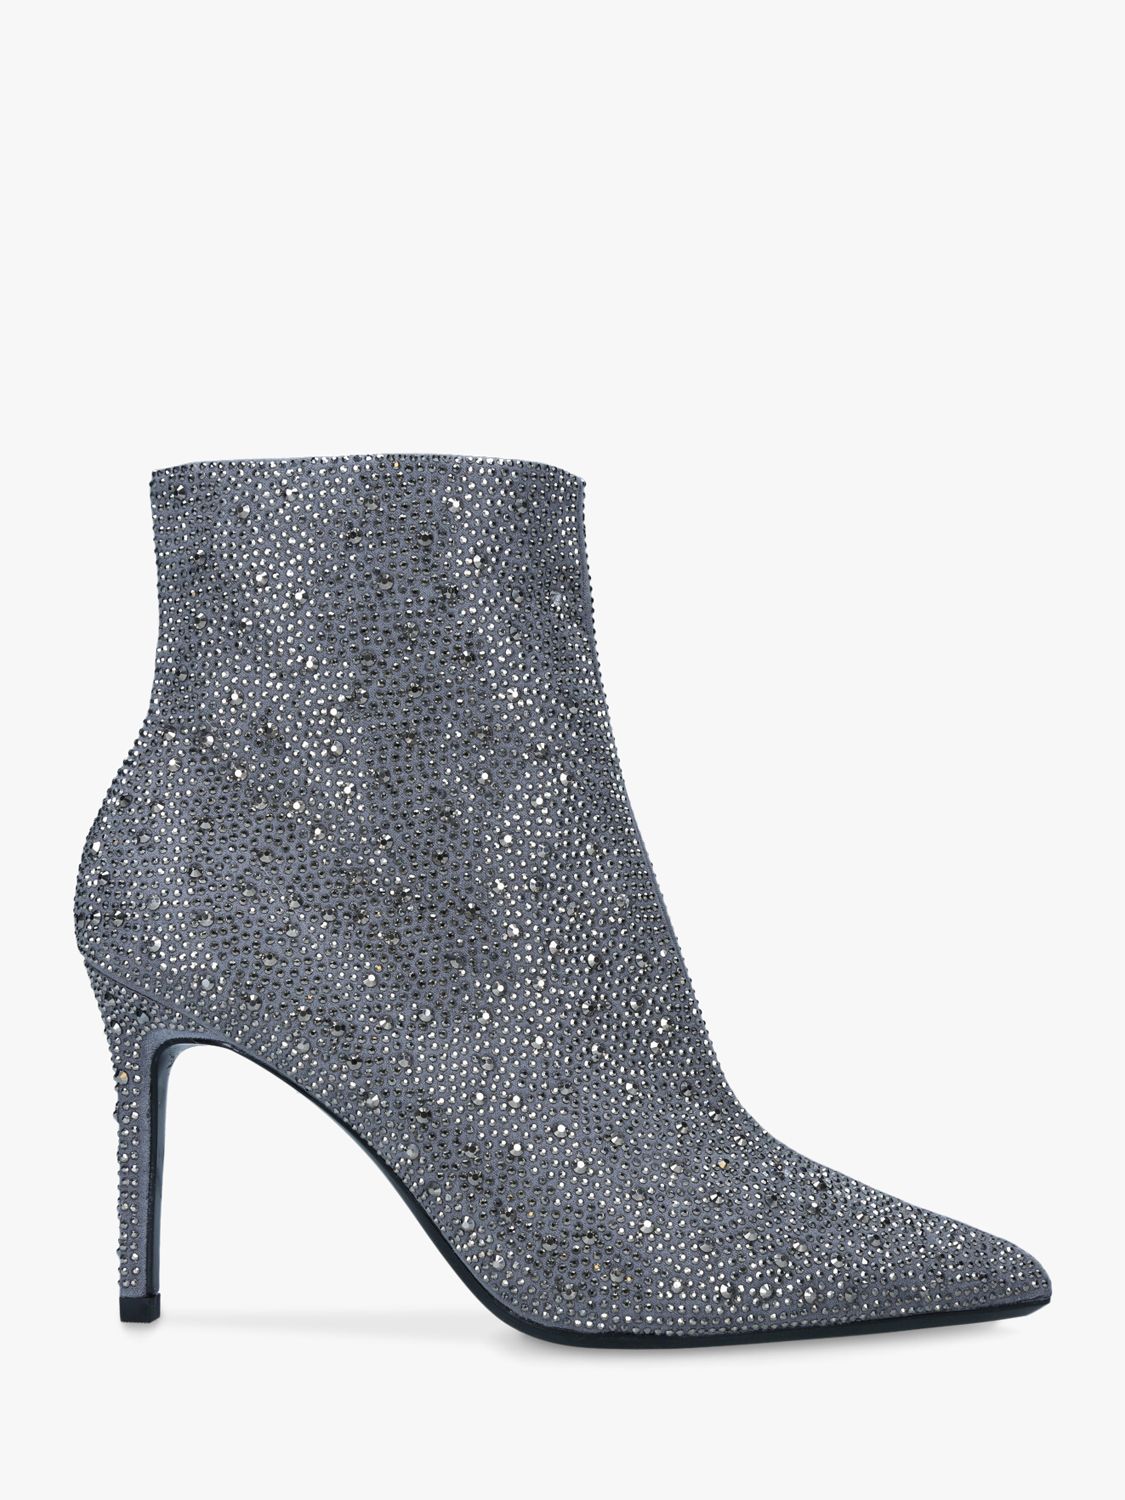 Igi co Shimmer Heeled Ankle Boots in Grey Grey Womens Shoes Boots Ankle boots 